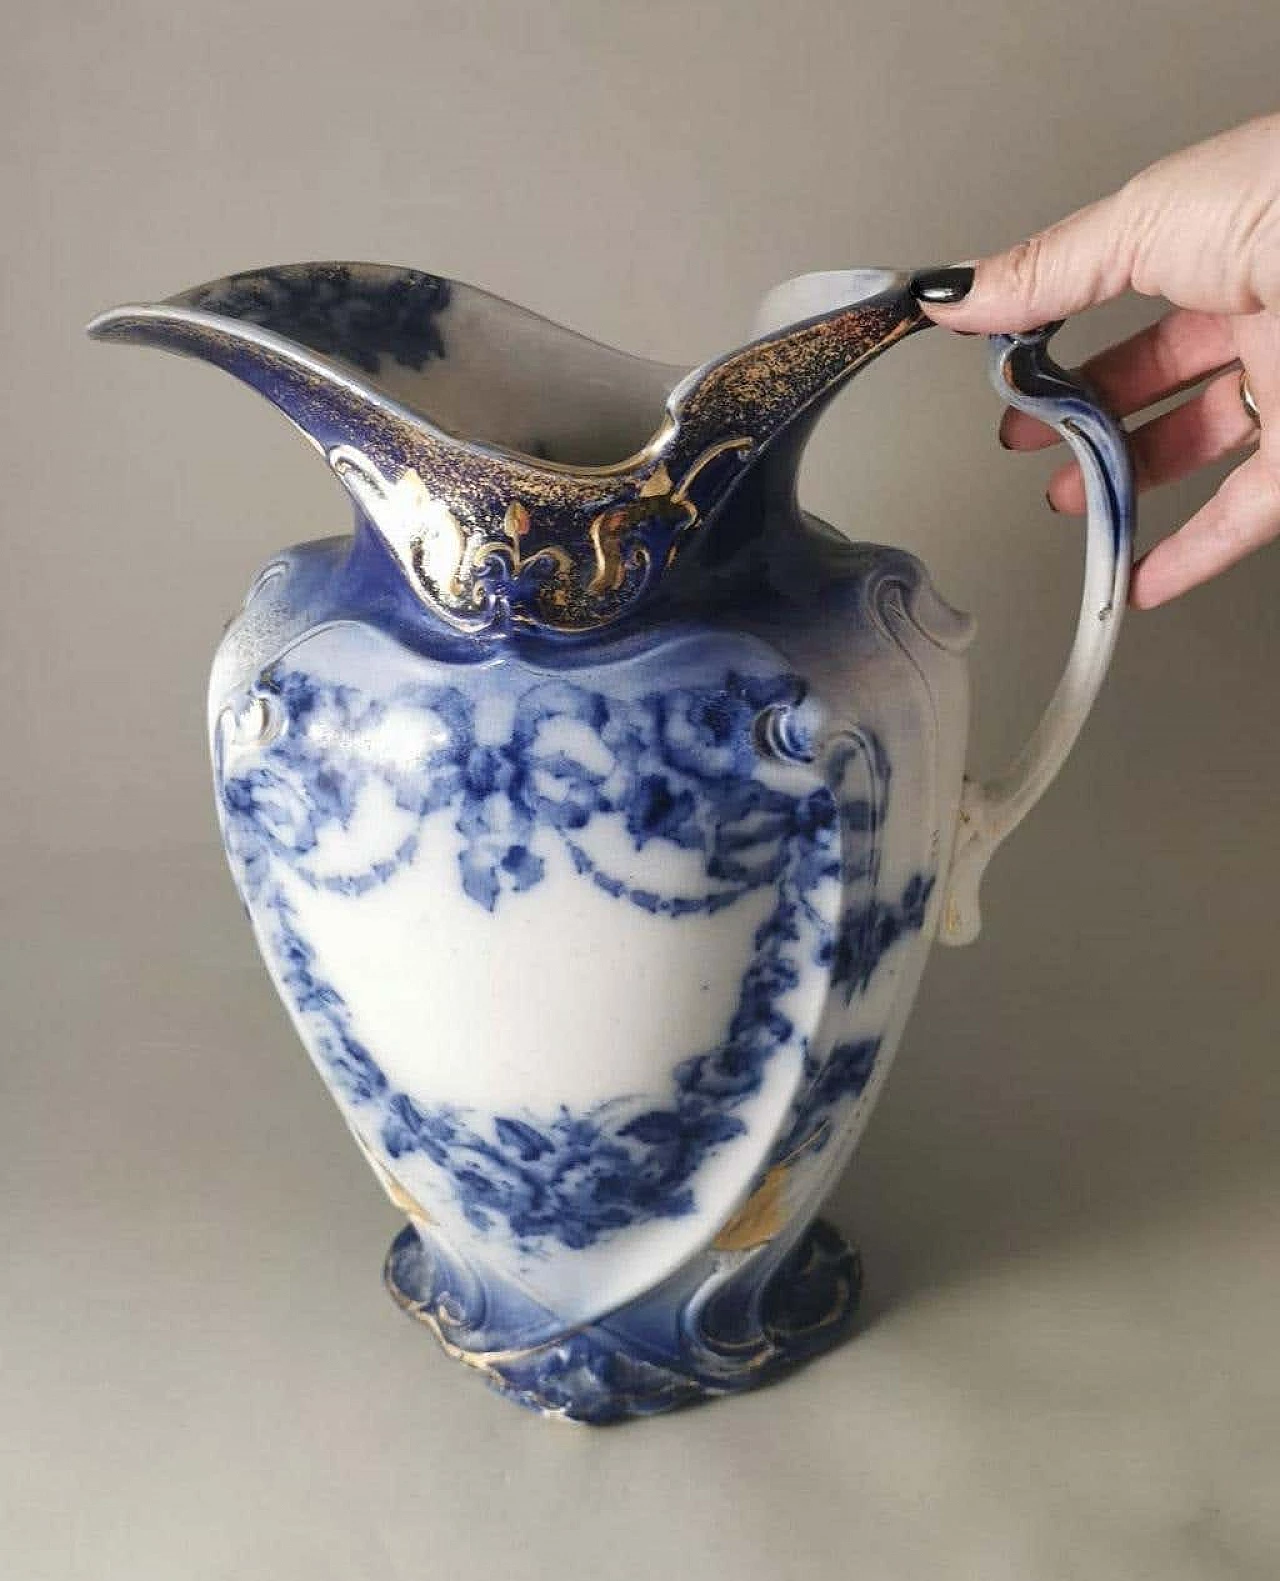 Victorian-style jug in white, blue and gold porcelain, late 19th century 19